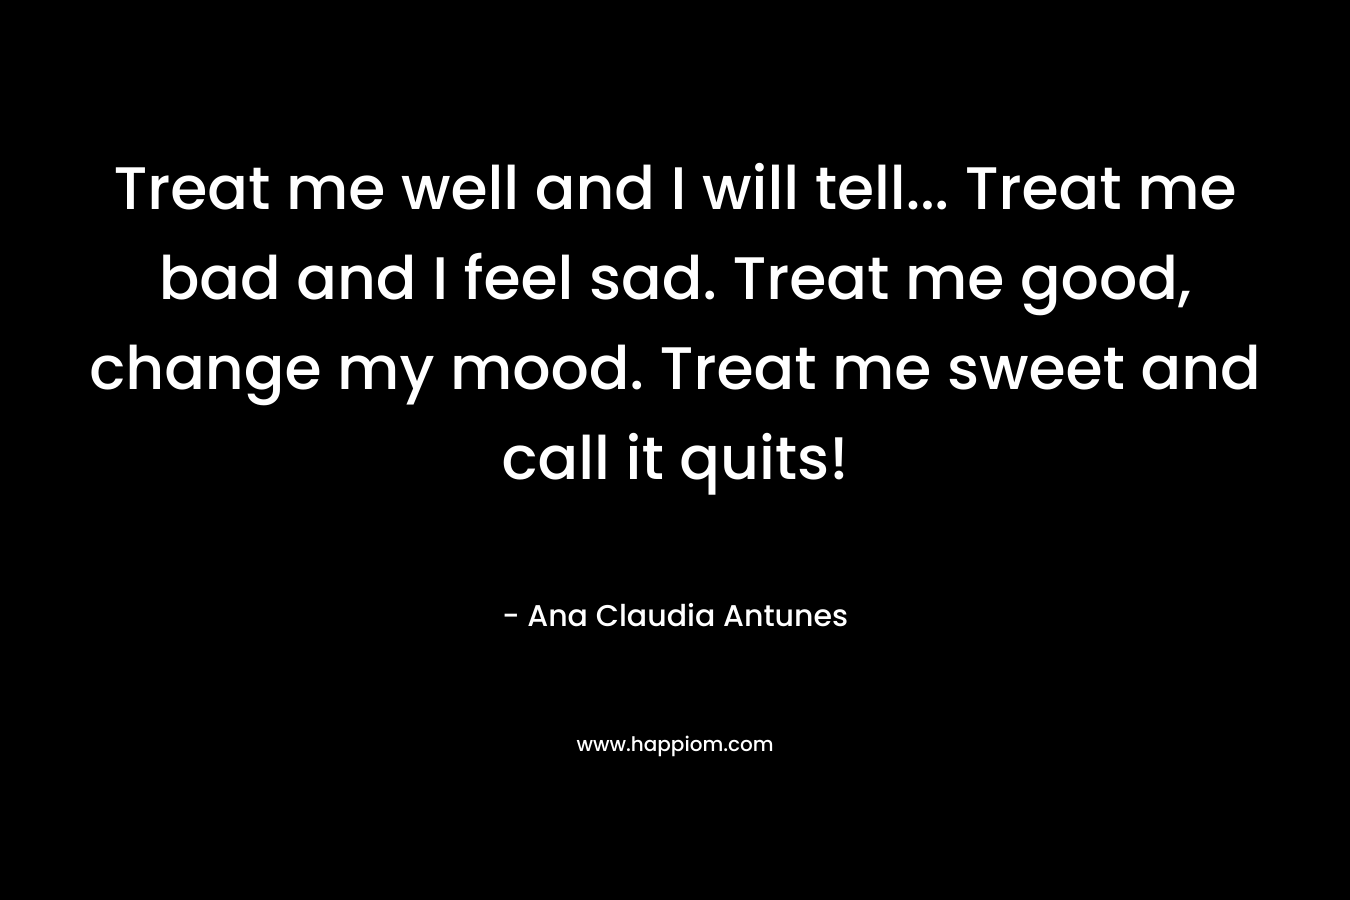 Treat me well and I will tell... Treat me bad and I feel sad. Treat me good, change my mood. Treat me sweet and call it quits!